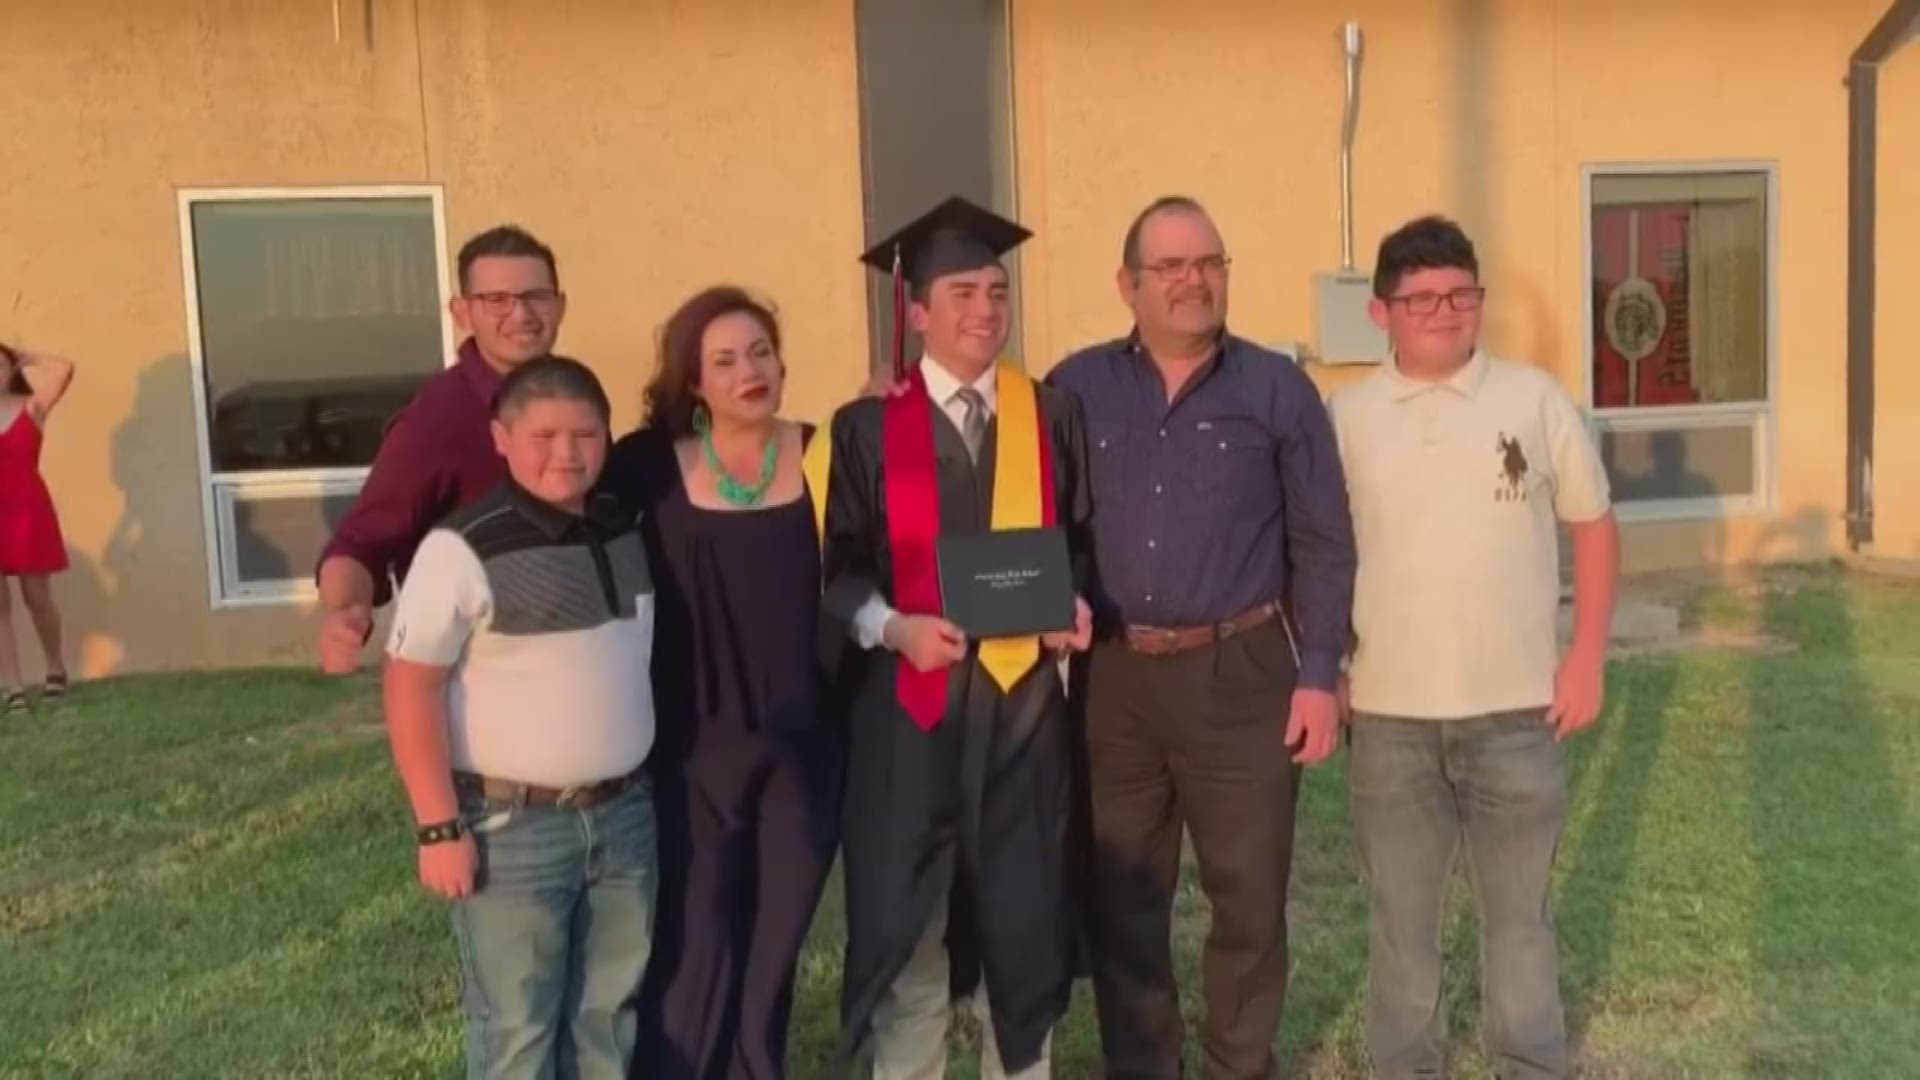 The soldier and brother of the high school graduate photobombed his family at graduation.